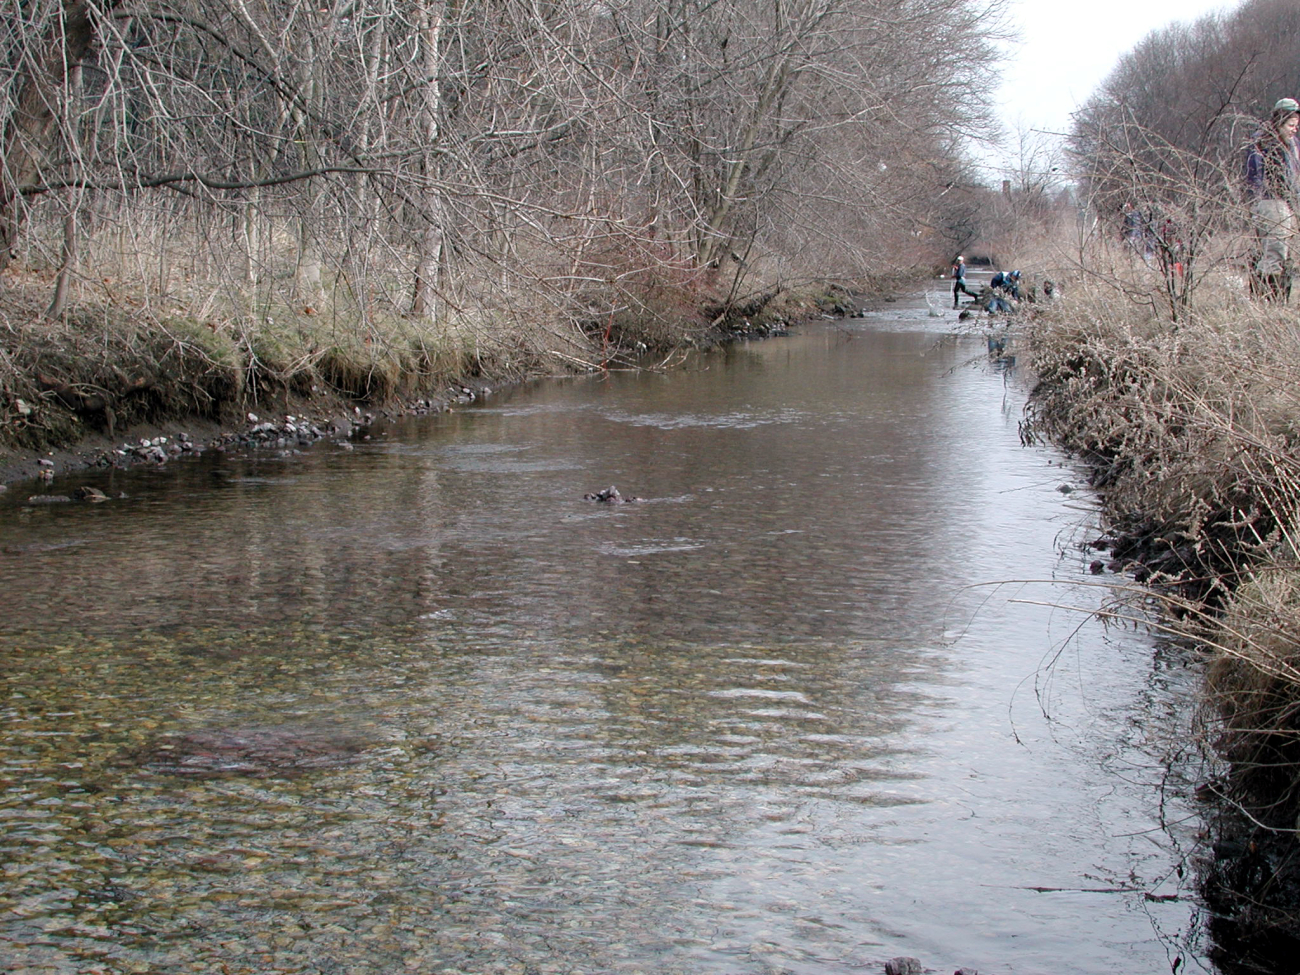 Looking downstream, note the new light colored rocks on the bottom